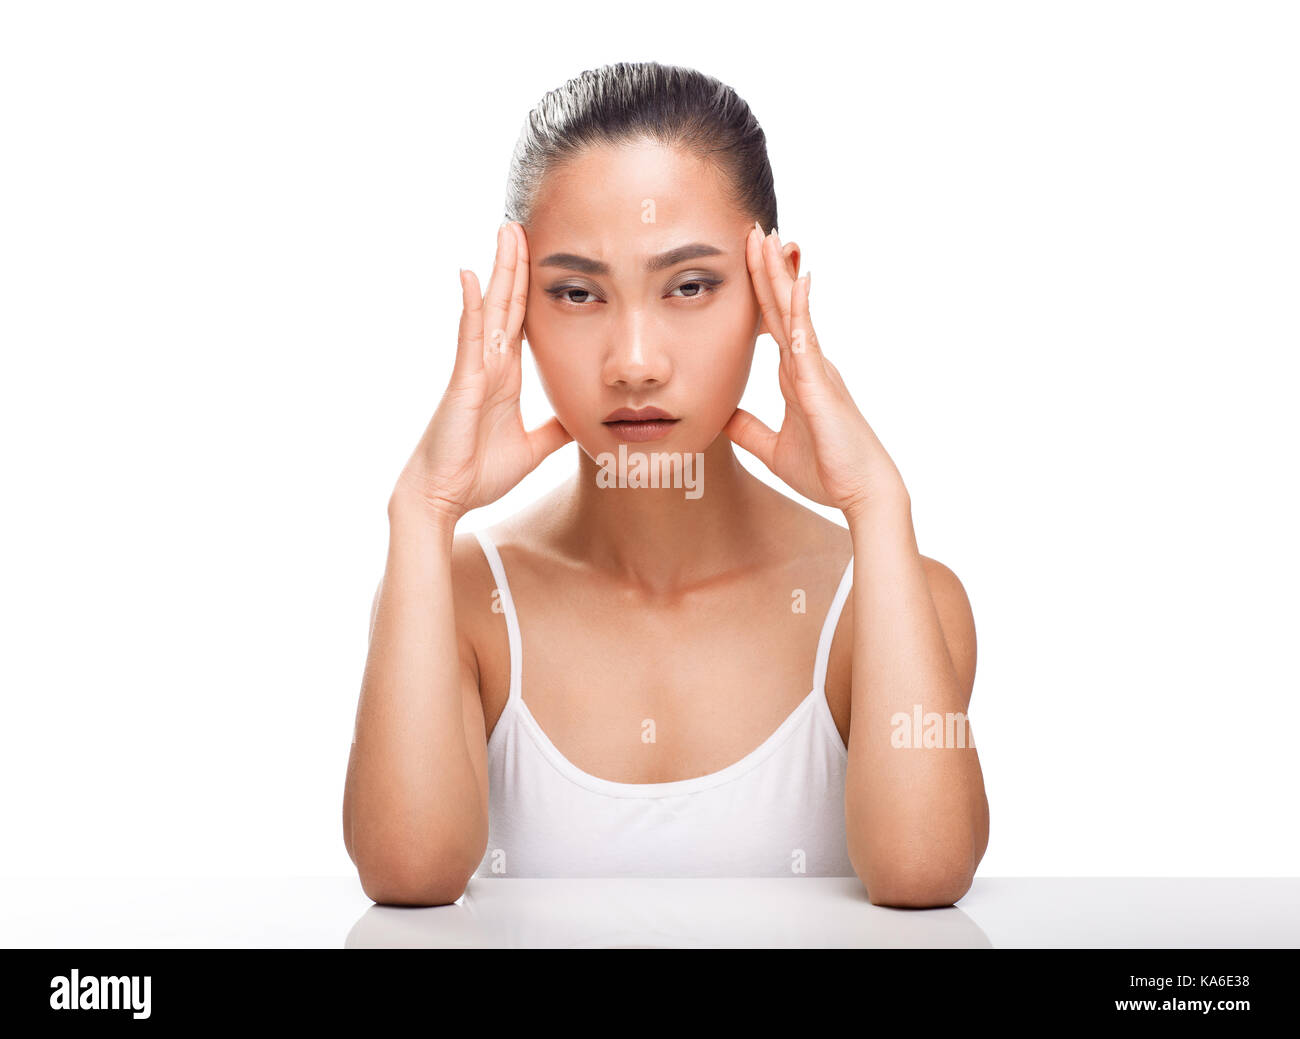 Young Asian woman having headache. Girl siting with sickly look. Expression of emotion pain, stress and fatigue. Female model isolated on white backgr Stock Photo